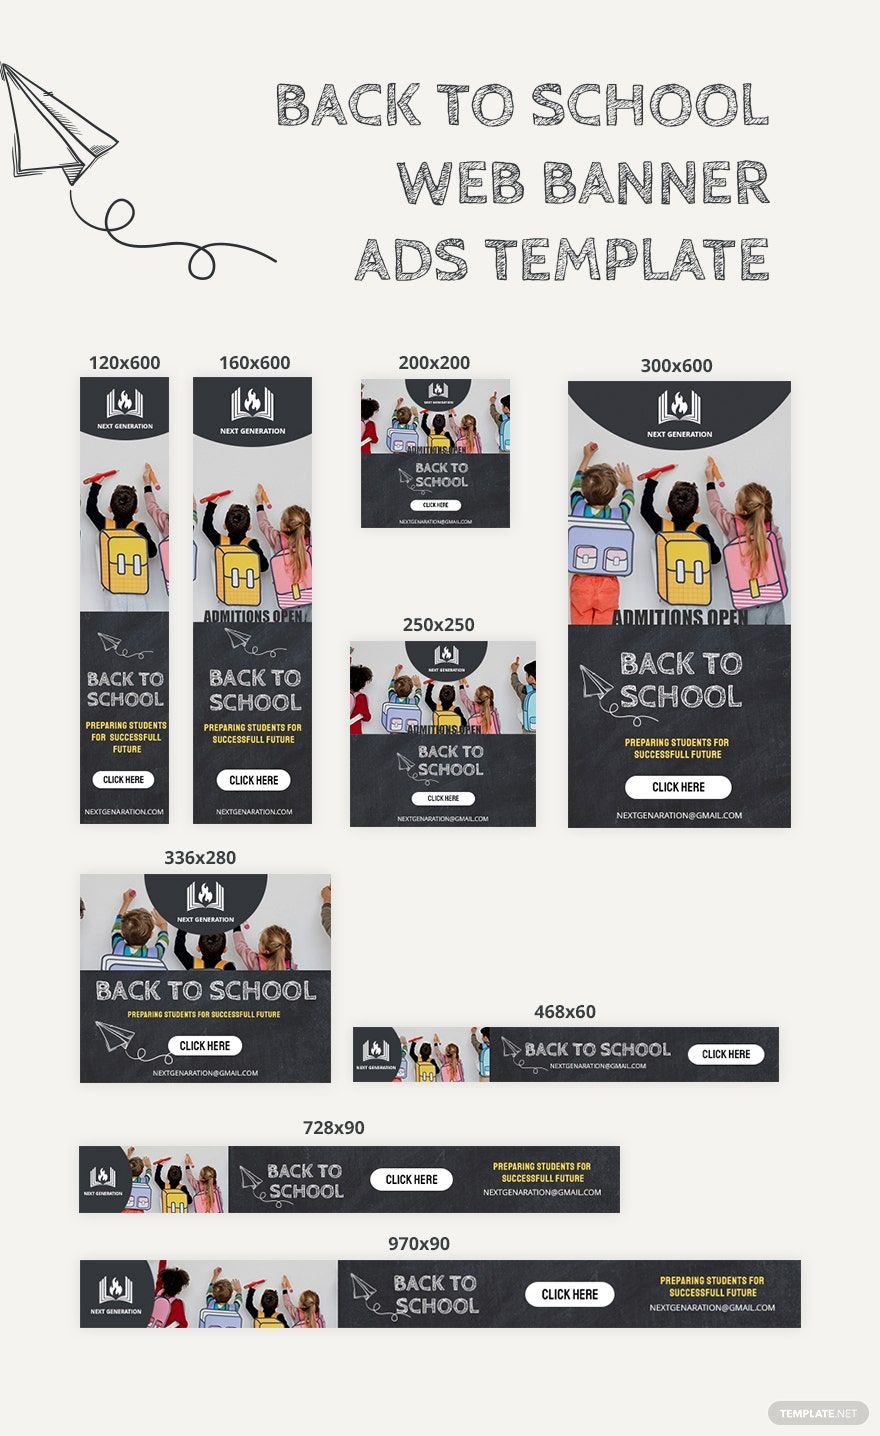 Back To School Web Banner Ads Template